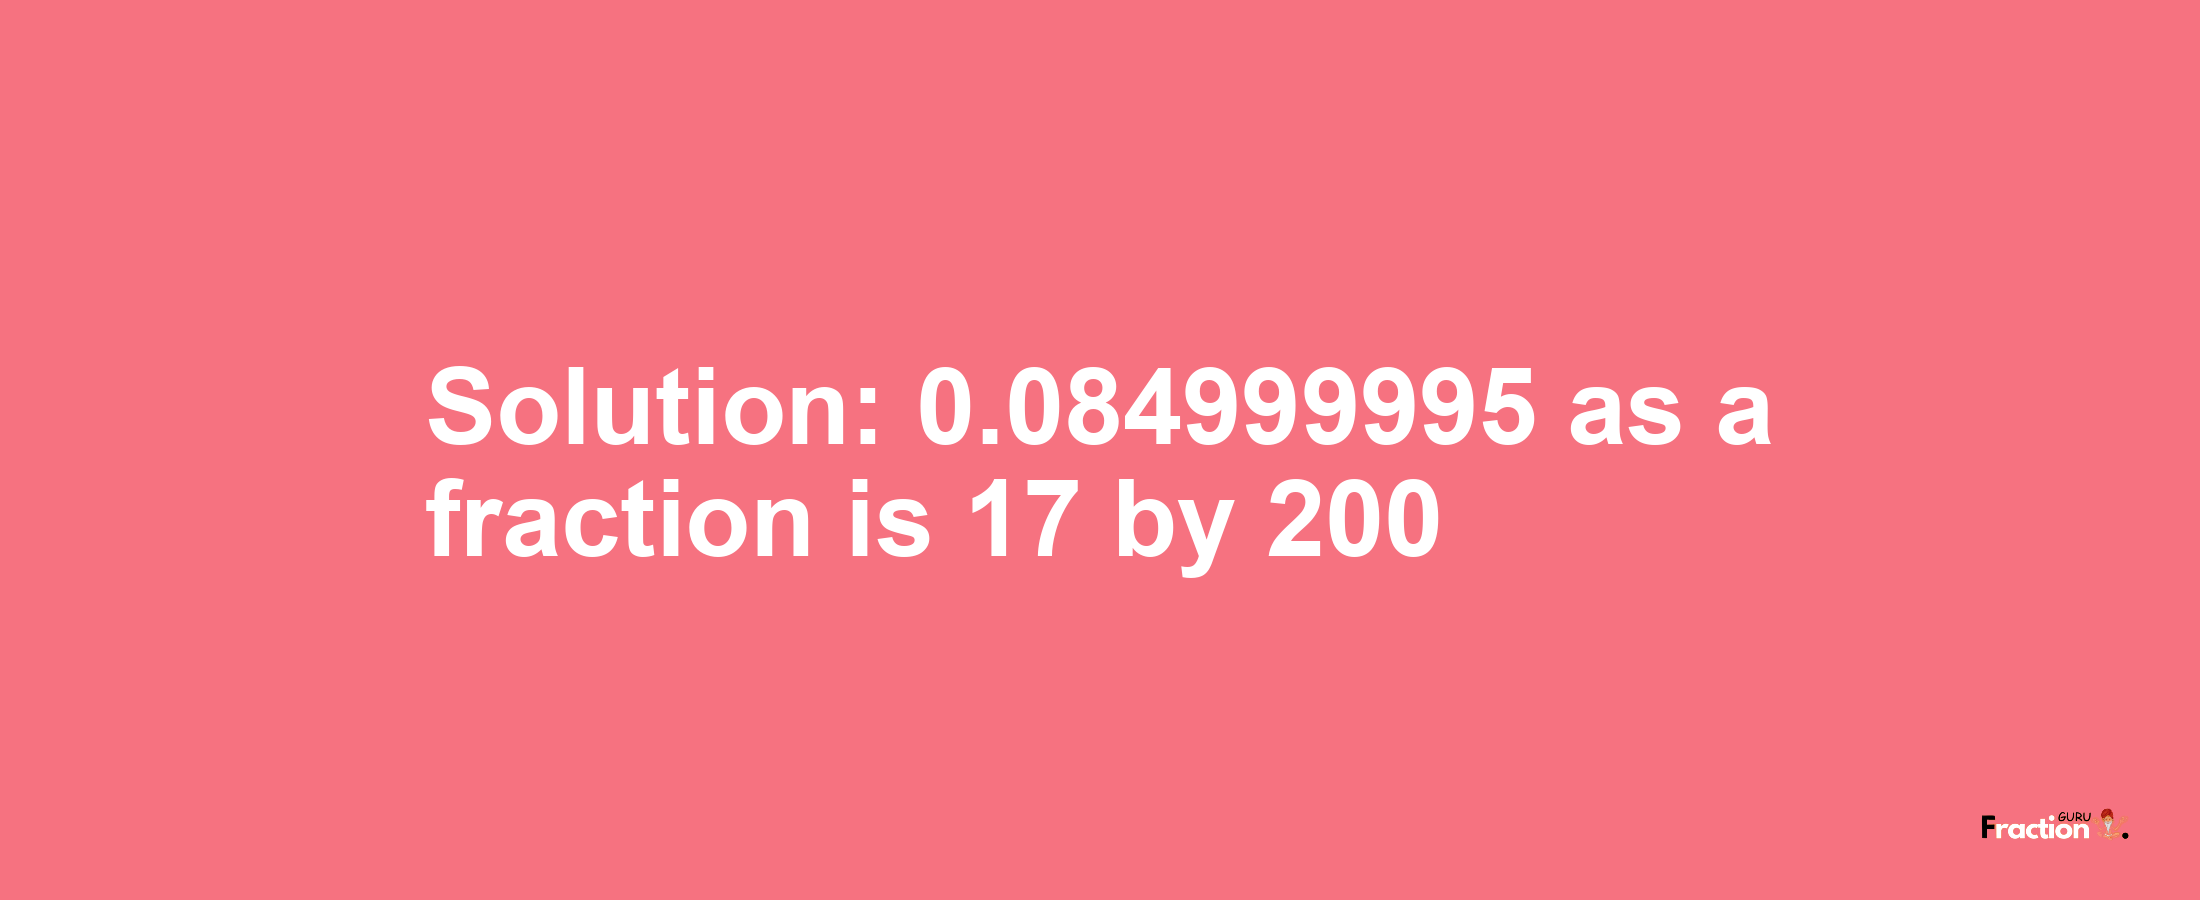 Solution:0.084999995 as a fraction is 17/200